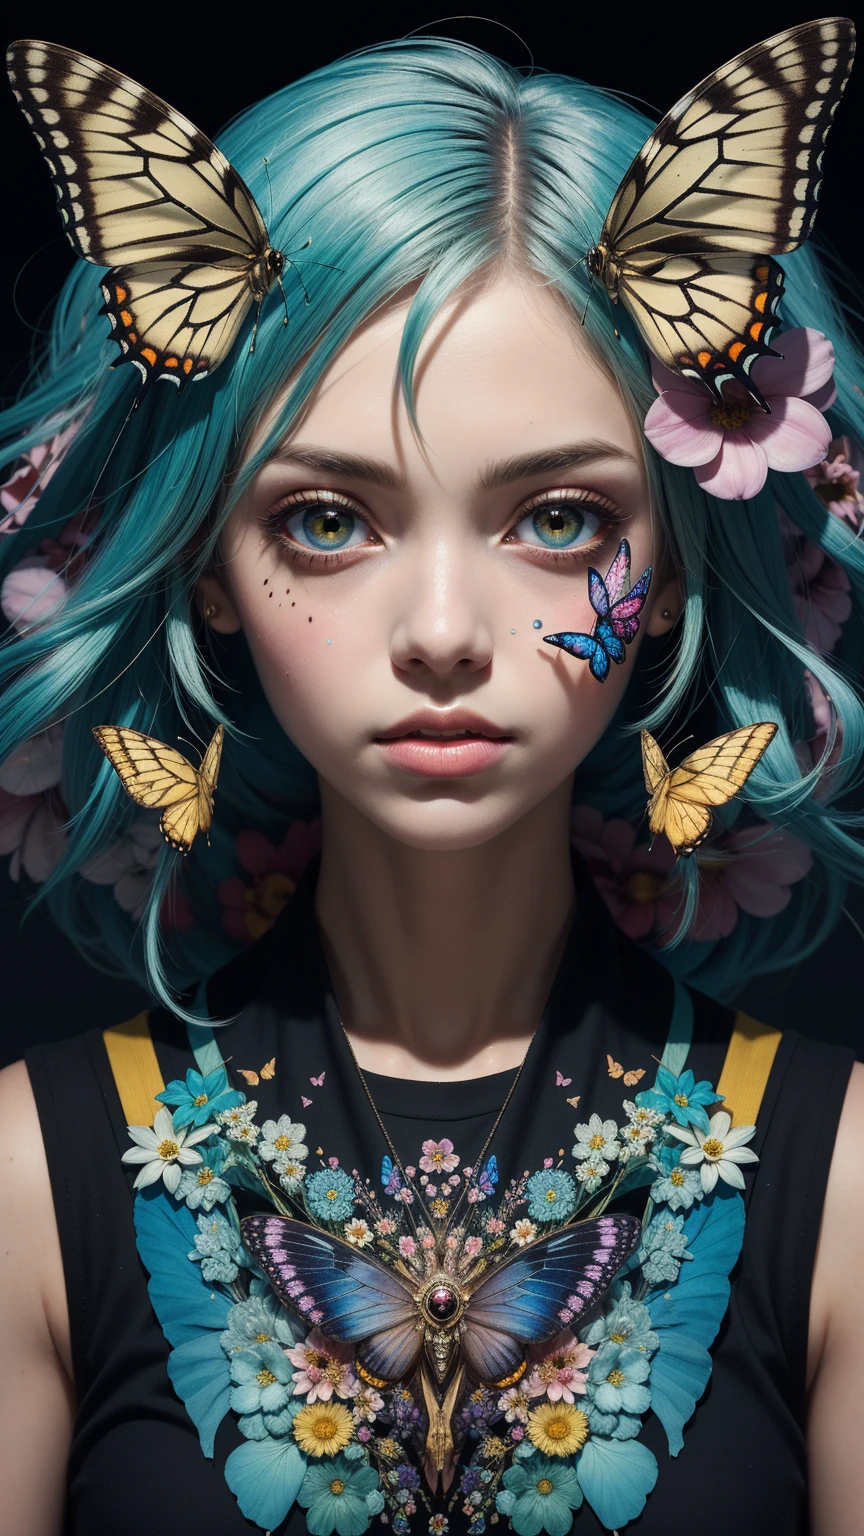 (masterpiece:1.1),(highest quality:1.1),(HDR:1),ambient light,ultra-high quality,( ultra detailed original illustration),(1girl, upper body),((harajuku fashion)),((flowers with human eyes, flower eyes)),double exposure,fusion of fluid abstract art,glitch,(original illustration composition),(fusion of limited color, maximalism artstyle, geometric artstyle, butterflies, junk art),